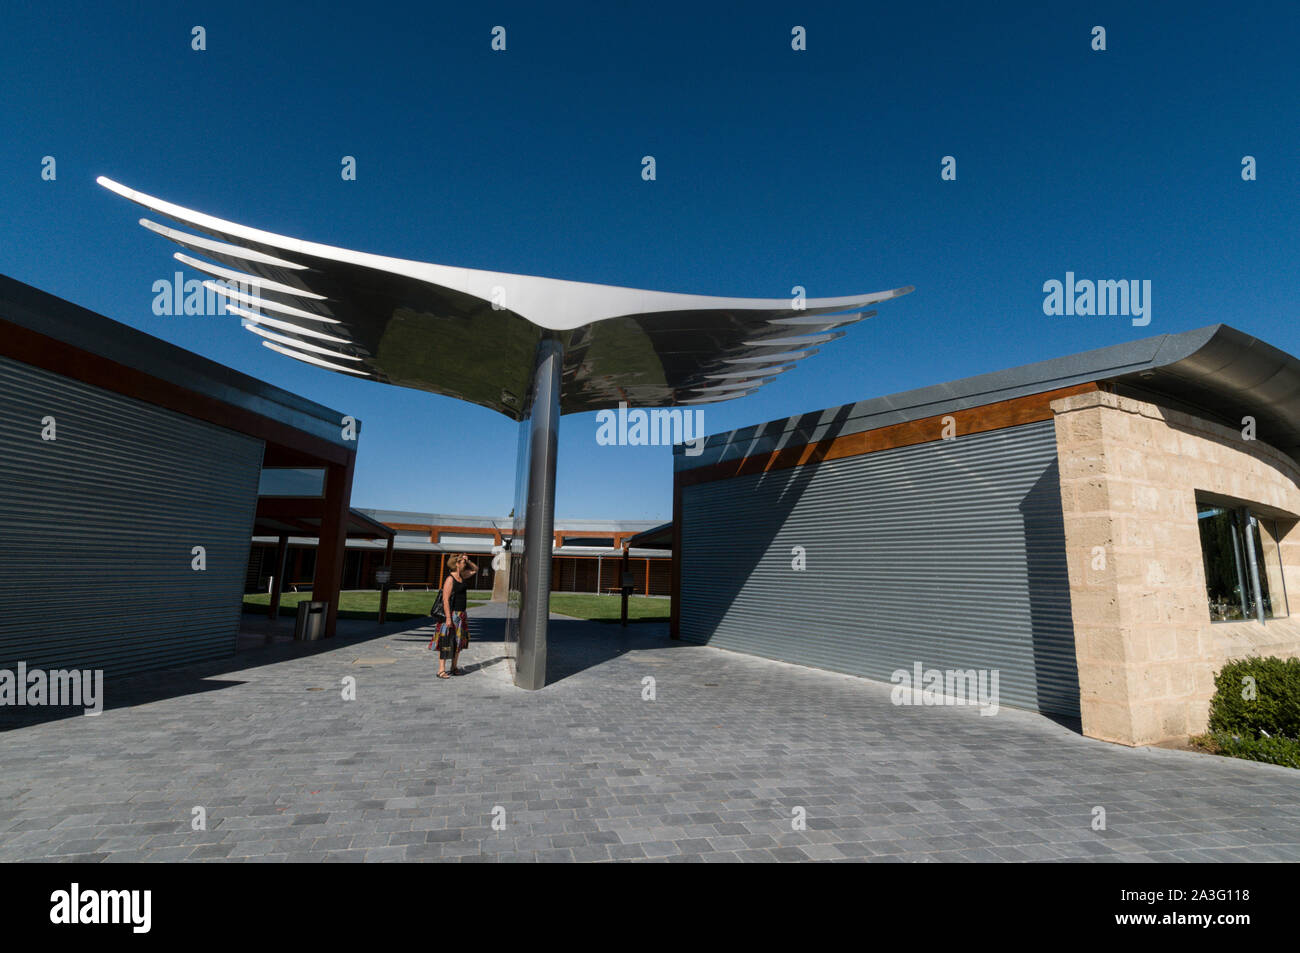 A sculpture designed as an eagle’s pair of wings of the Wolf Blass trademark at the main winery visitor’s centrein the Barossa Valley wine region in S Stock Photo